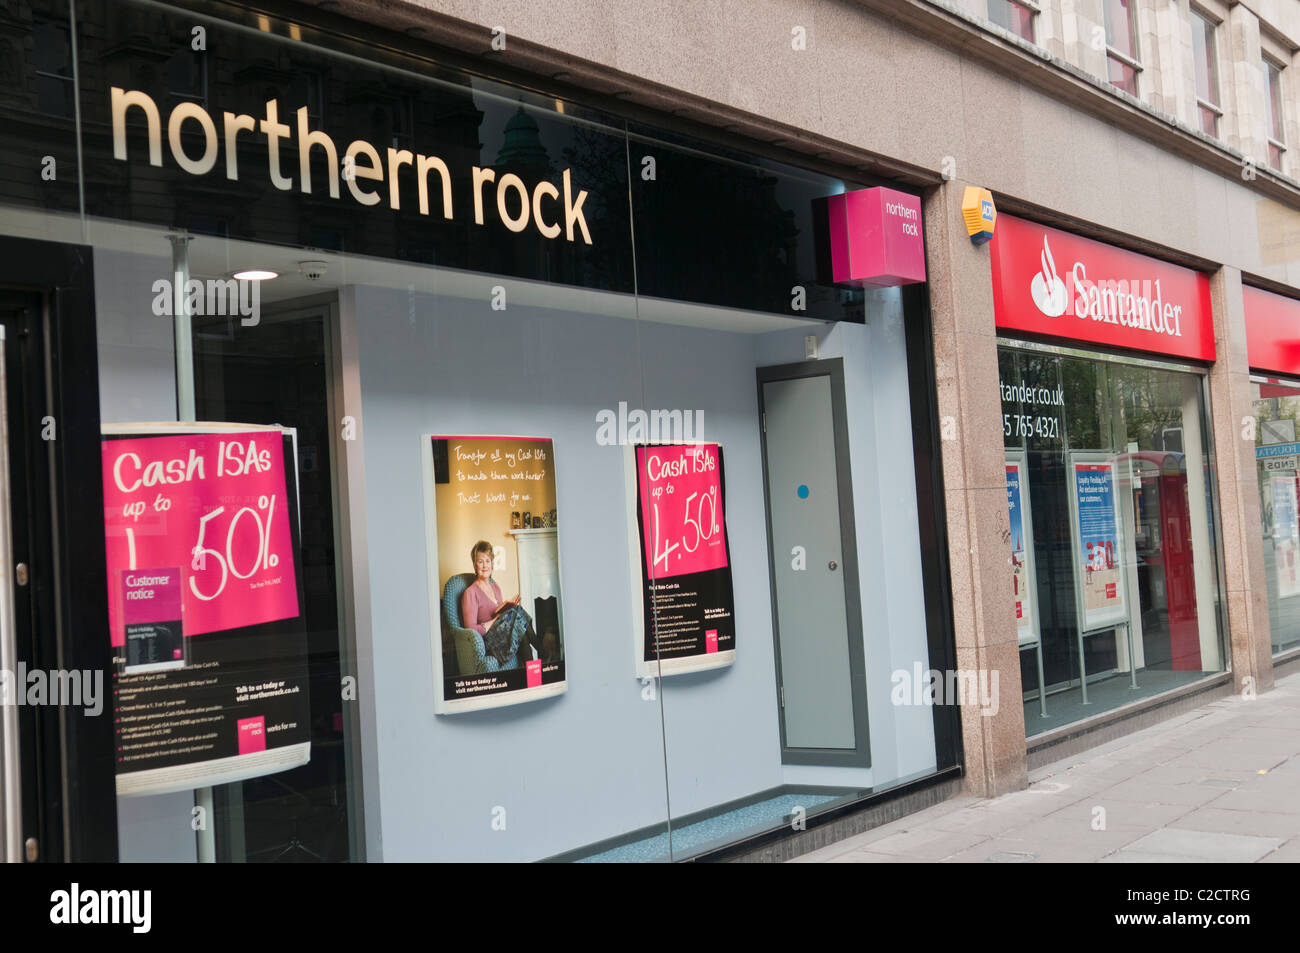 Northern Rock and Santander banks, side by side on a High Street Stock Photo